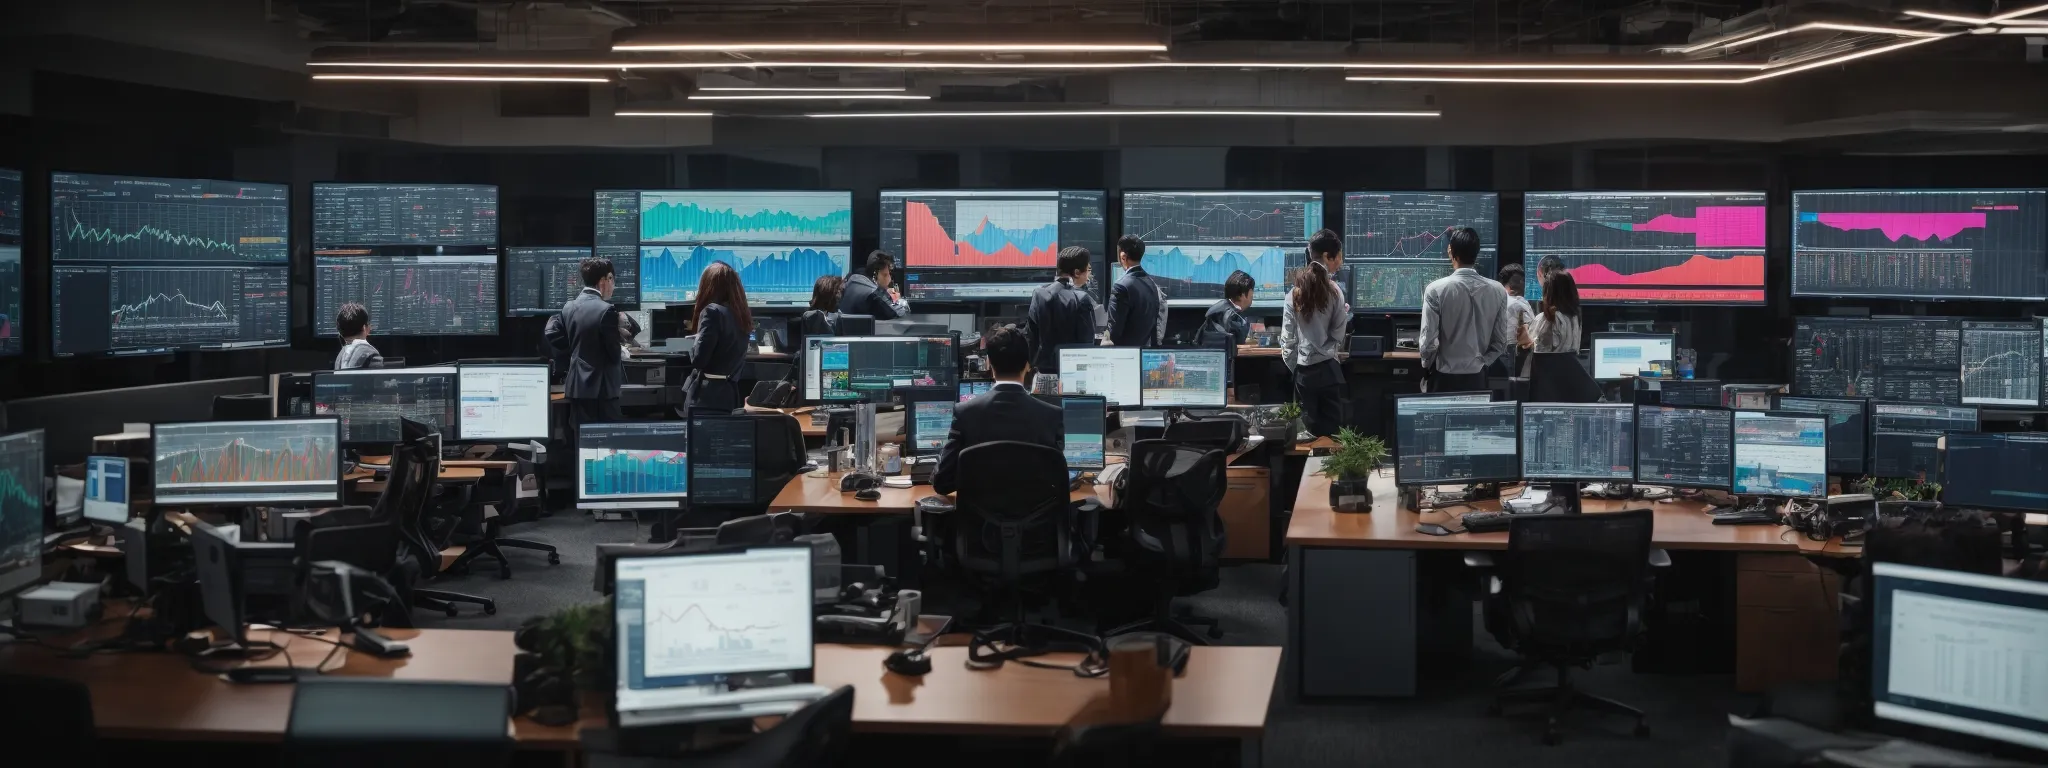 a bustling modern office with multiple large computer monitors displaying colorful graphs and analytics dashboards, while marketers discuss strategies.